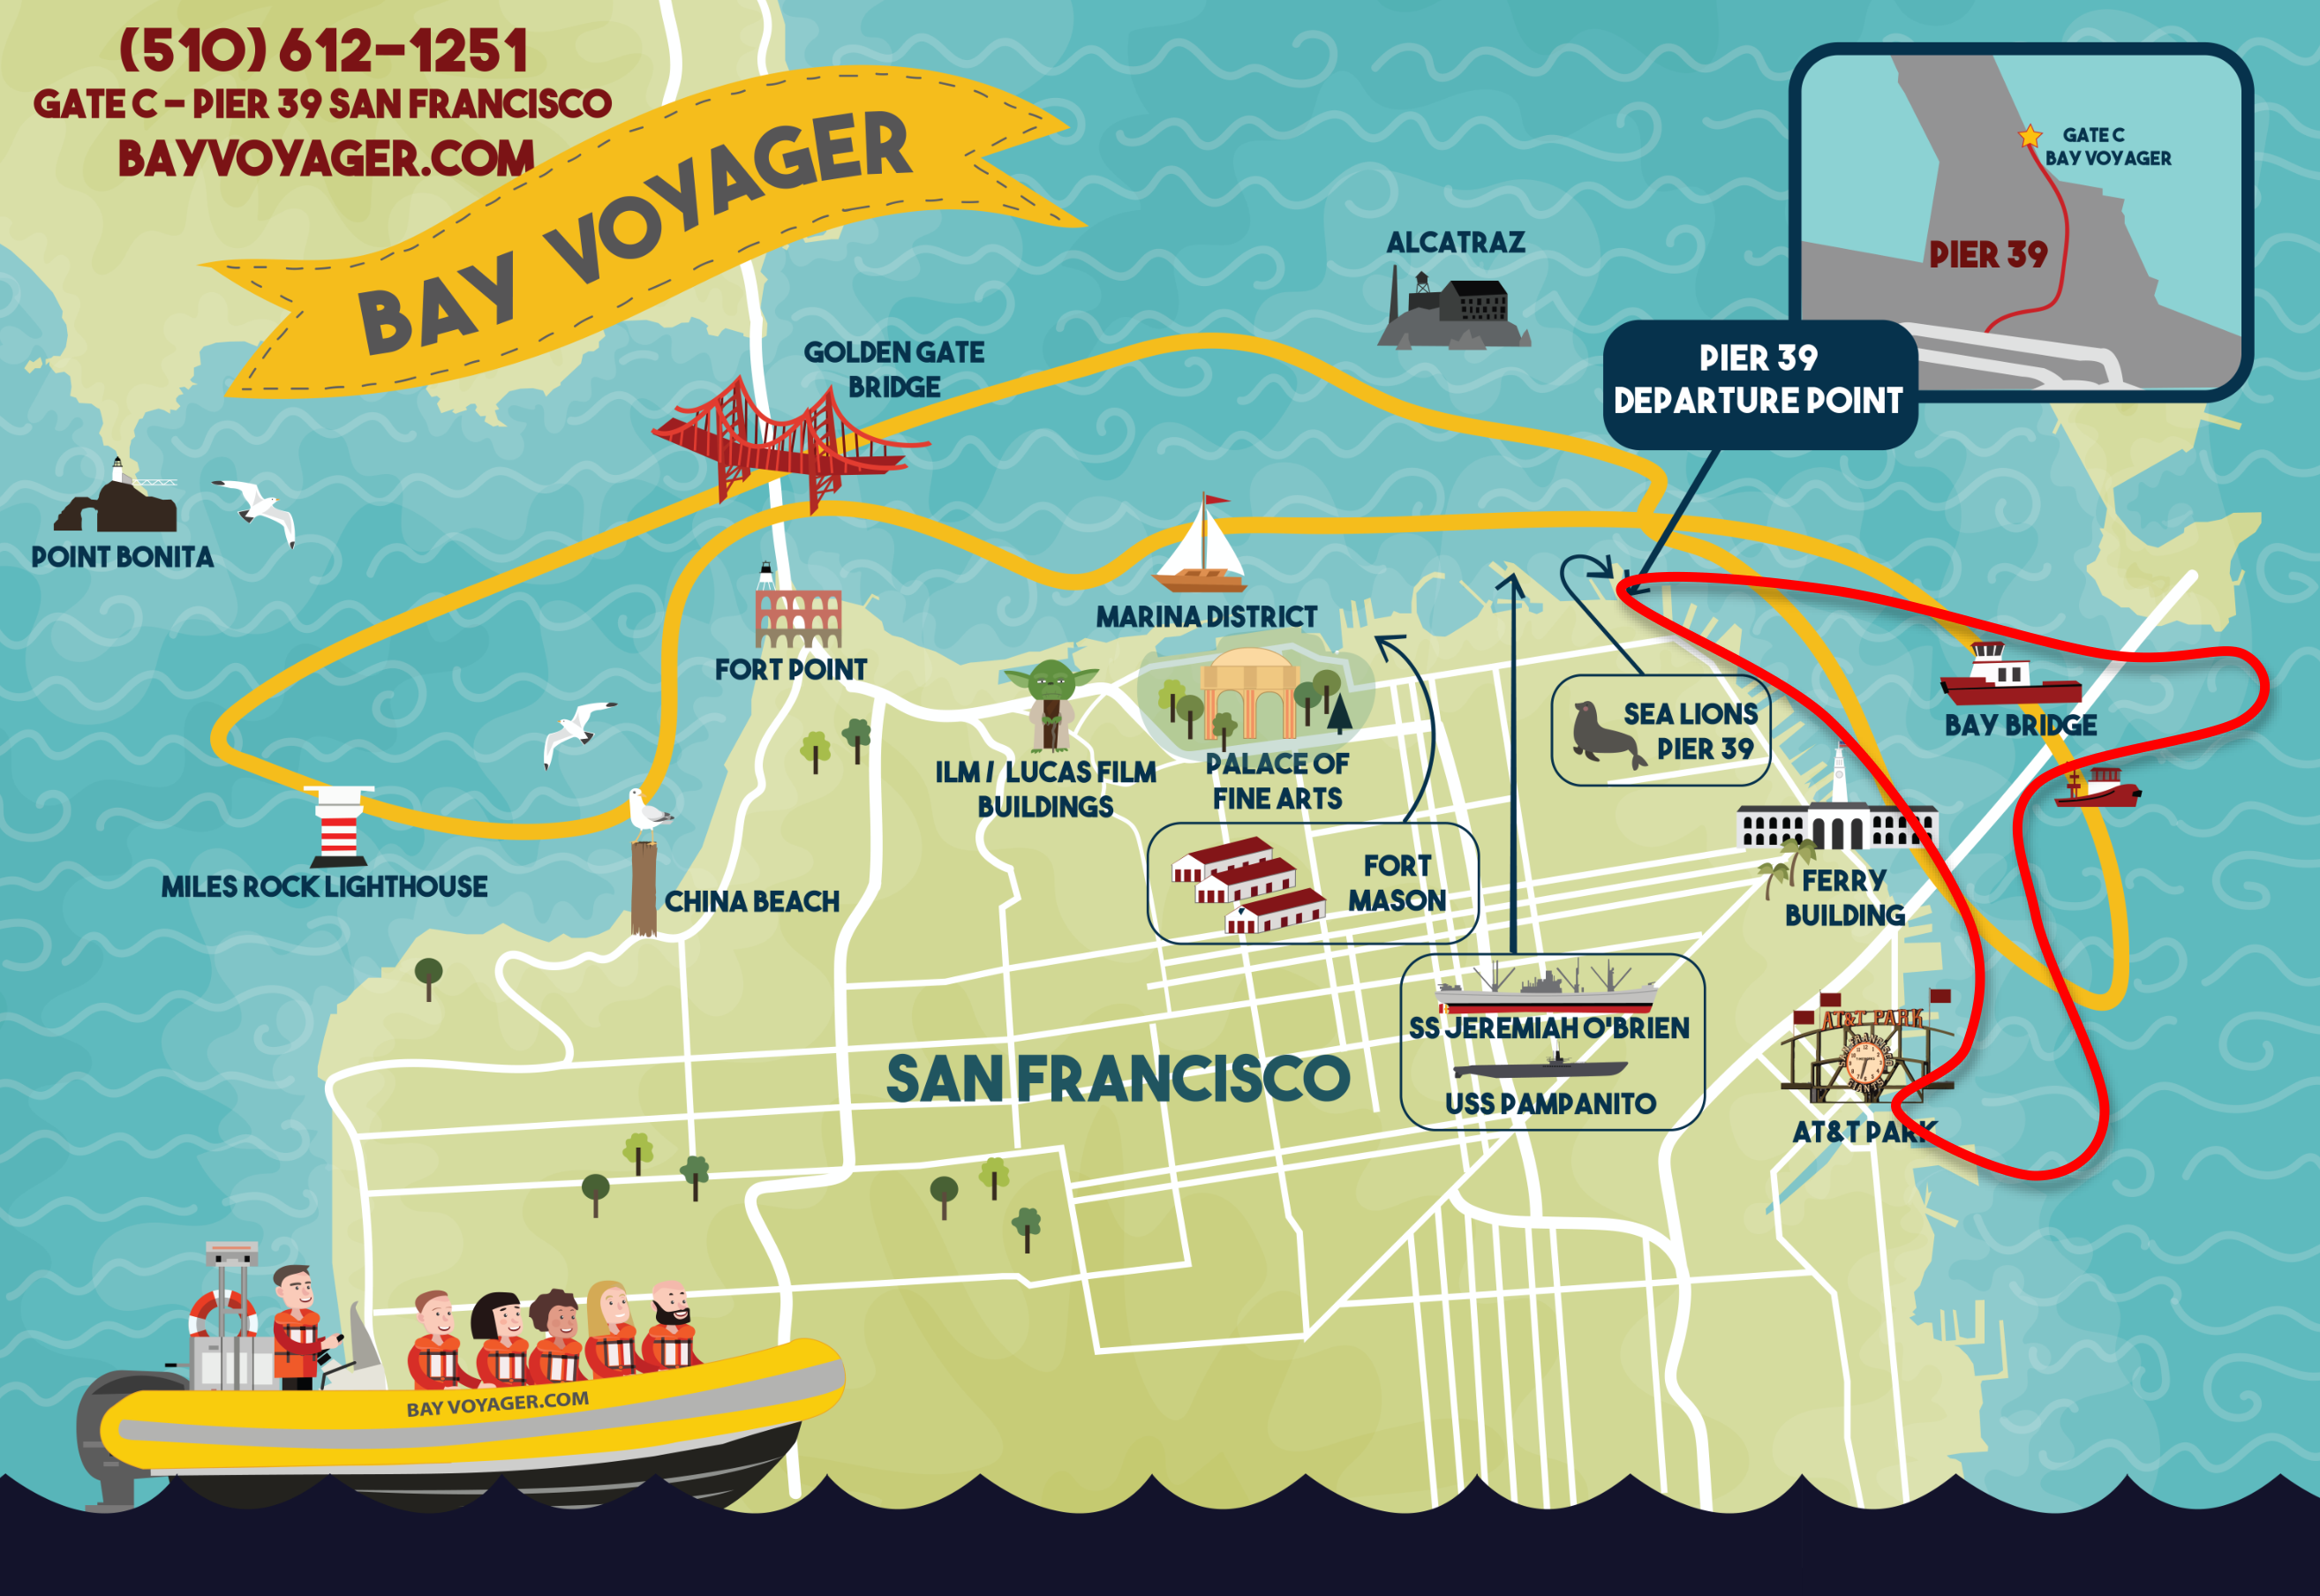 45 South Bay Voyager Map 2021 2